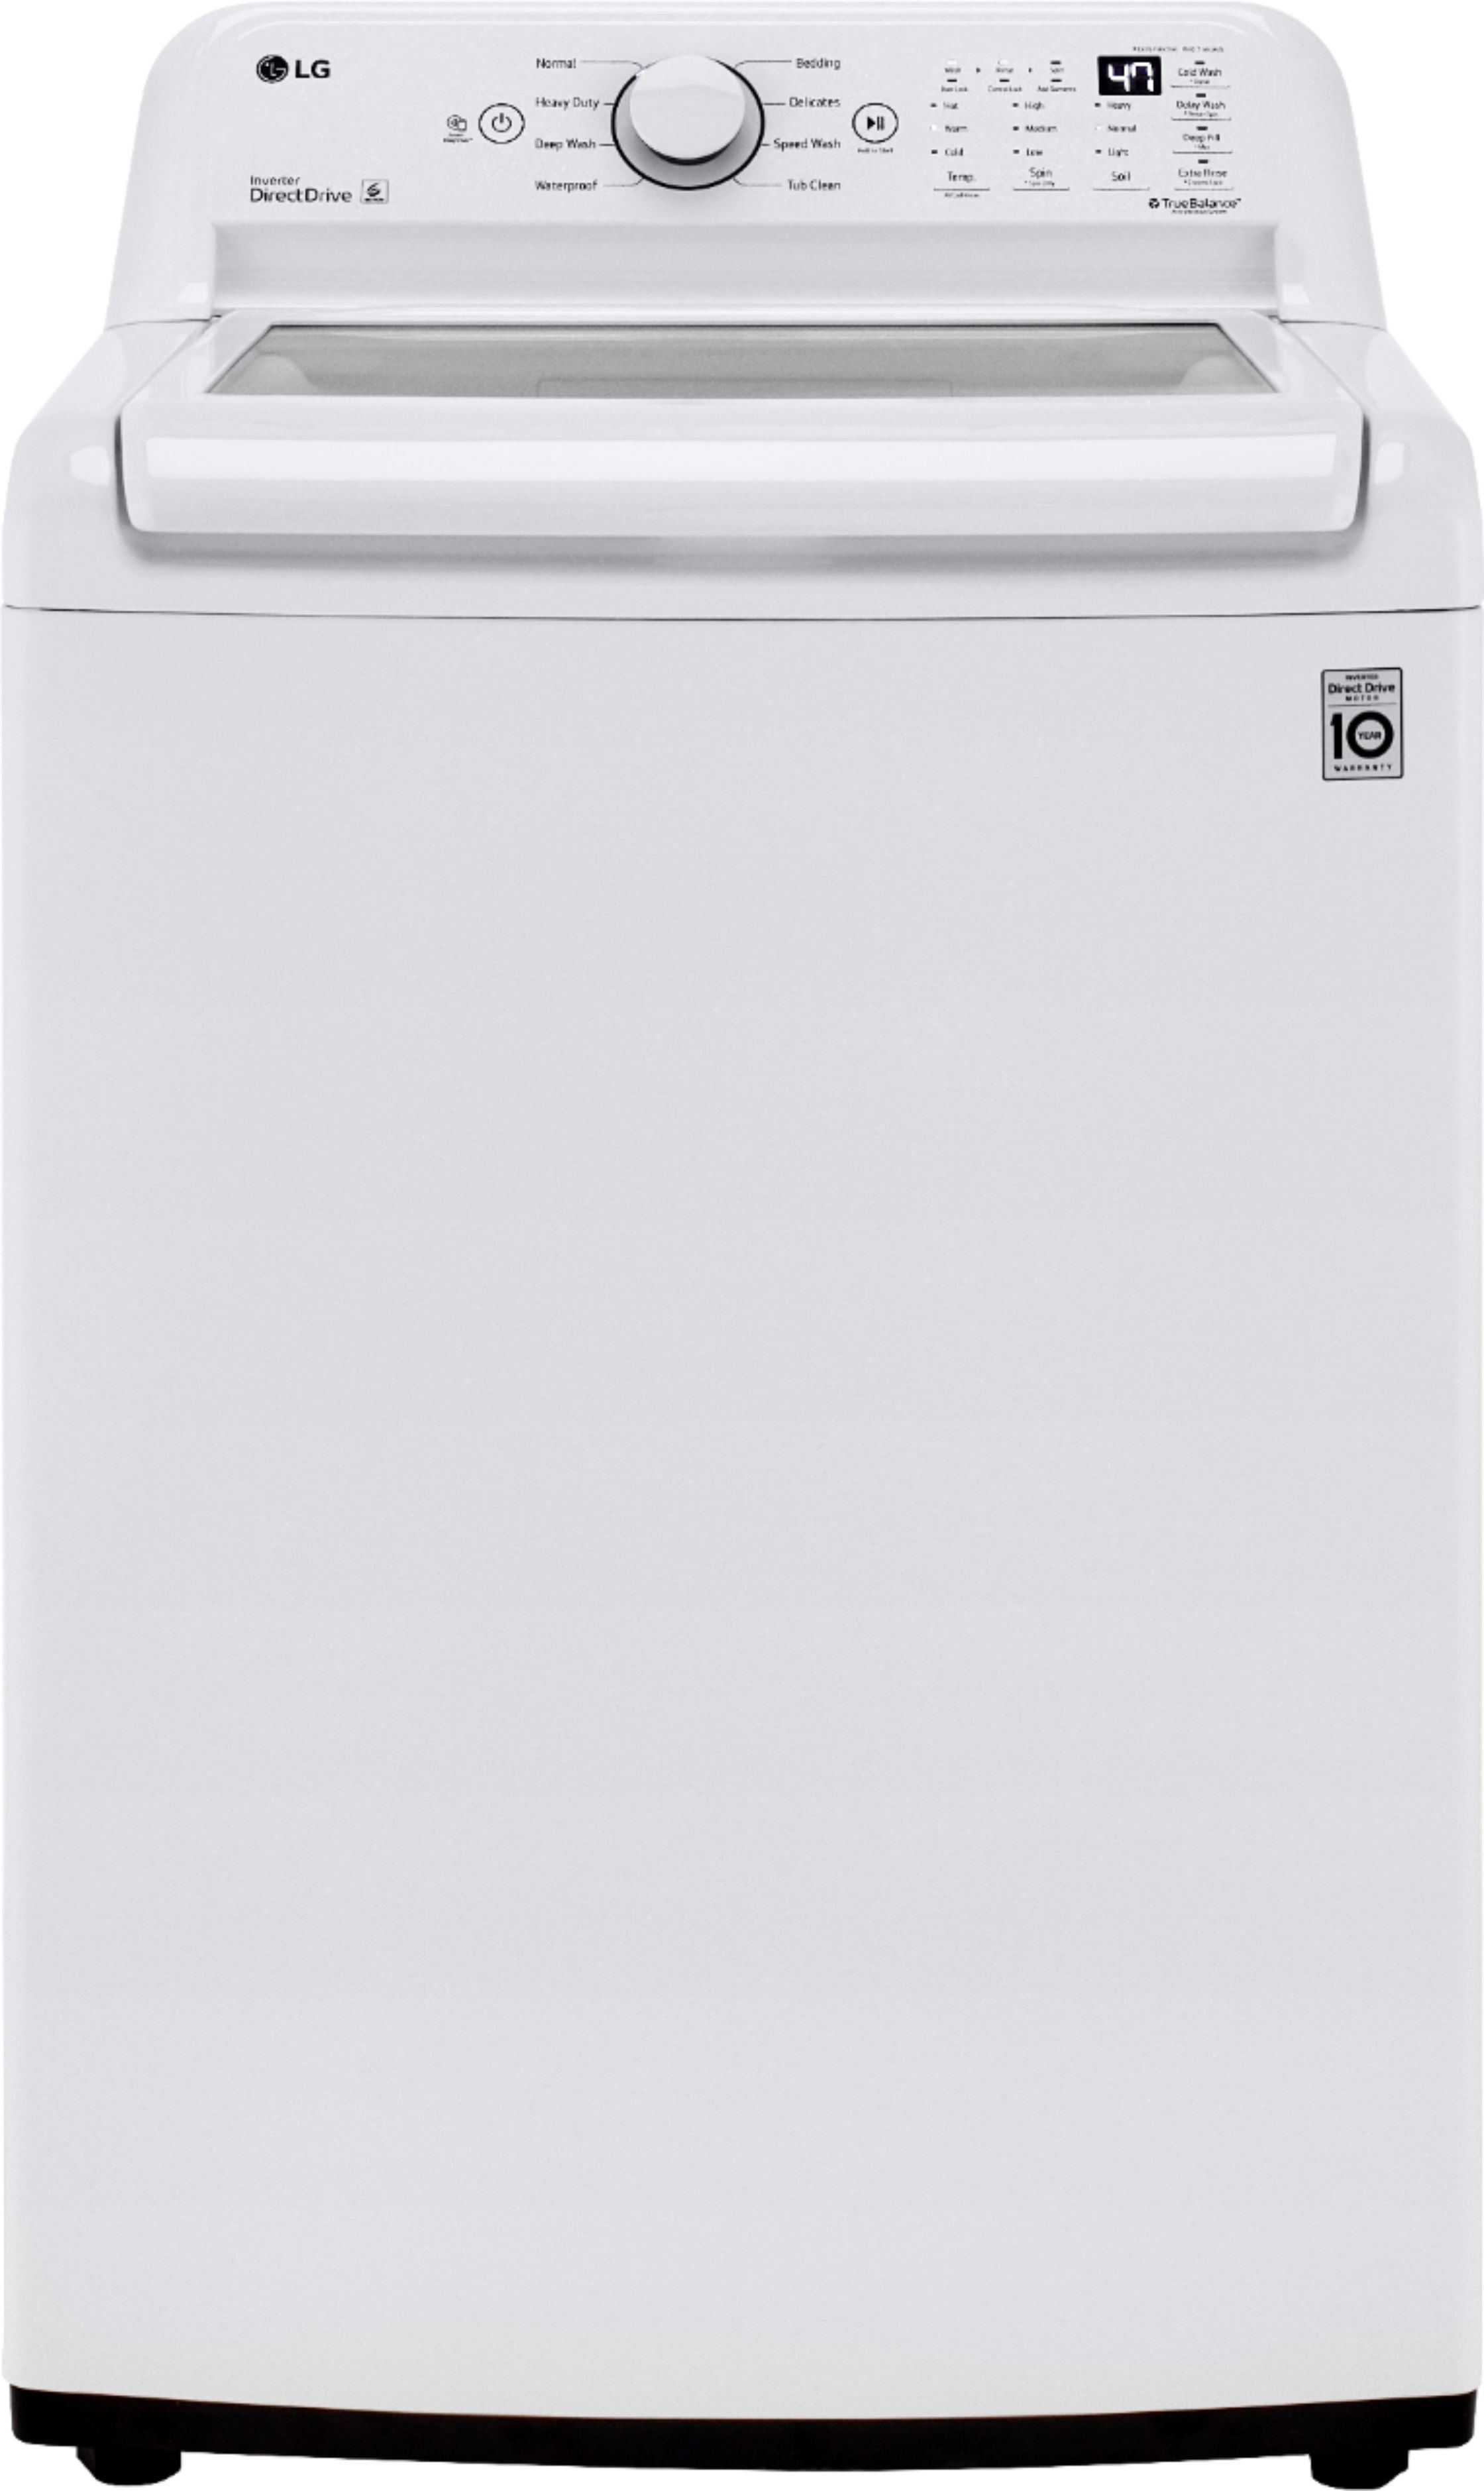 LG WT7005CW 4.3 Cu. Ft. High-Efficiency Smart Top Load Washer